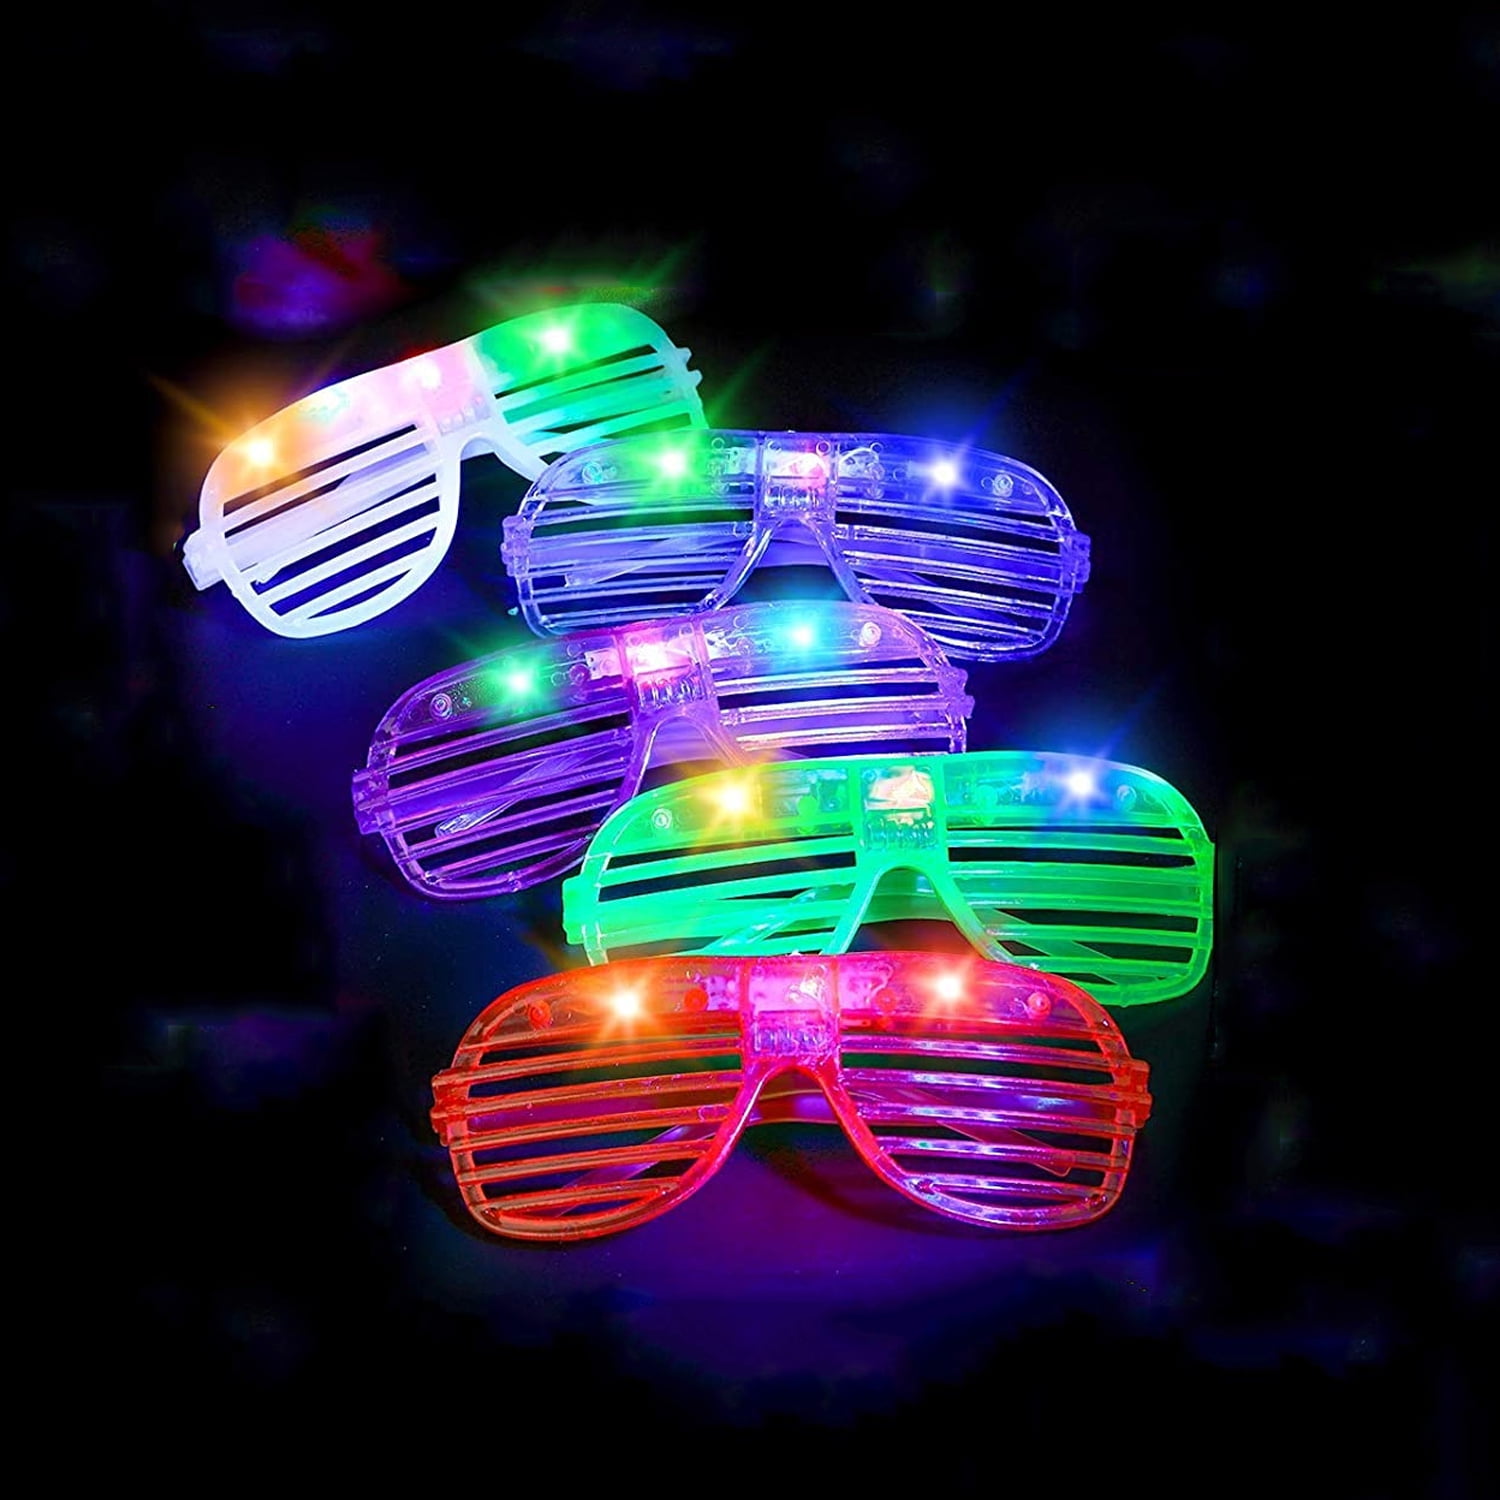 Mosie LED Lights Glasses 12 Pack Glow Glasses Neon Party Supplies Battery Powered in Assorted Colors in the Dark Party Supplies Pack 